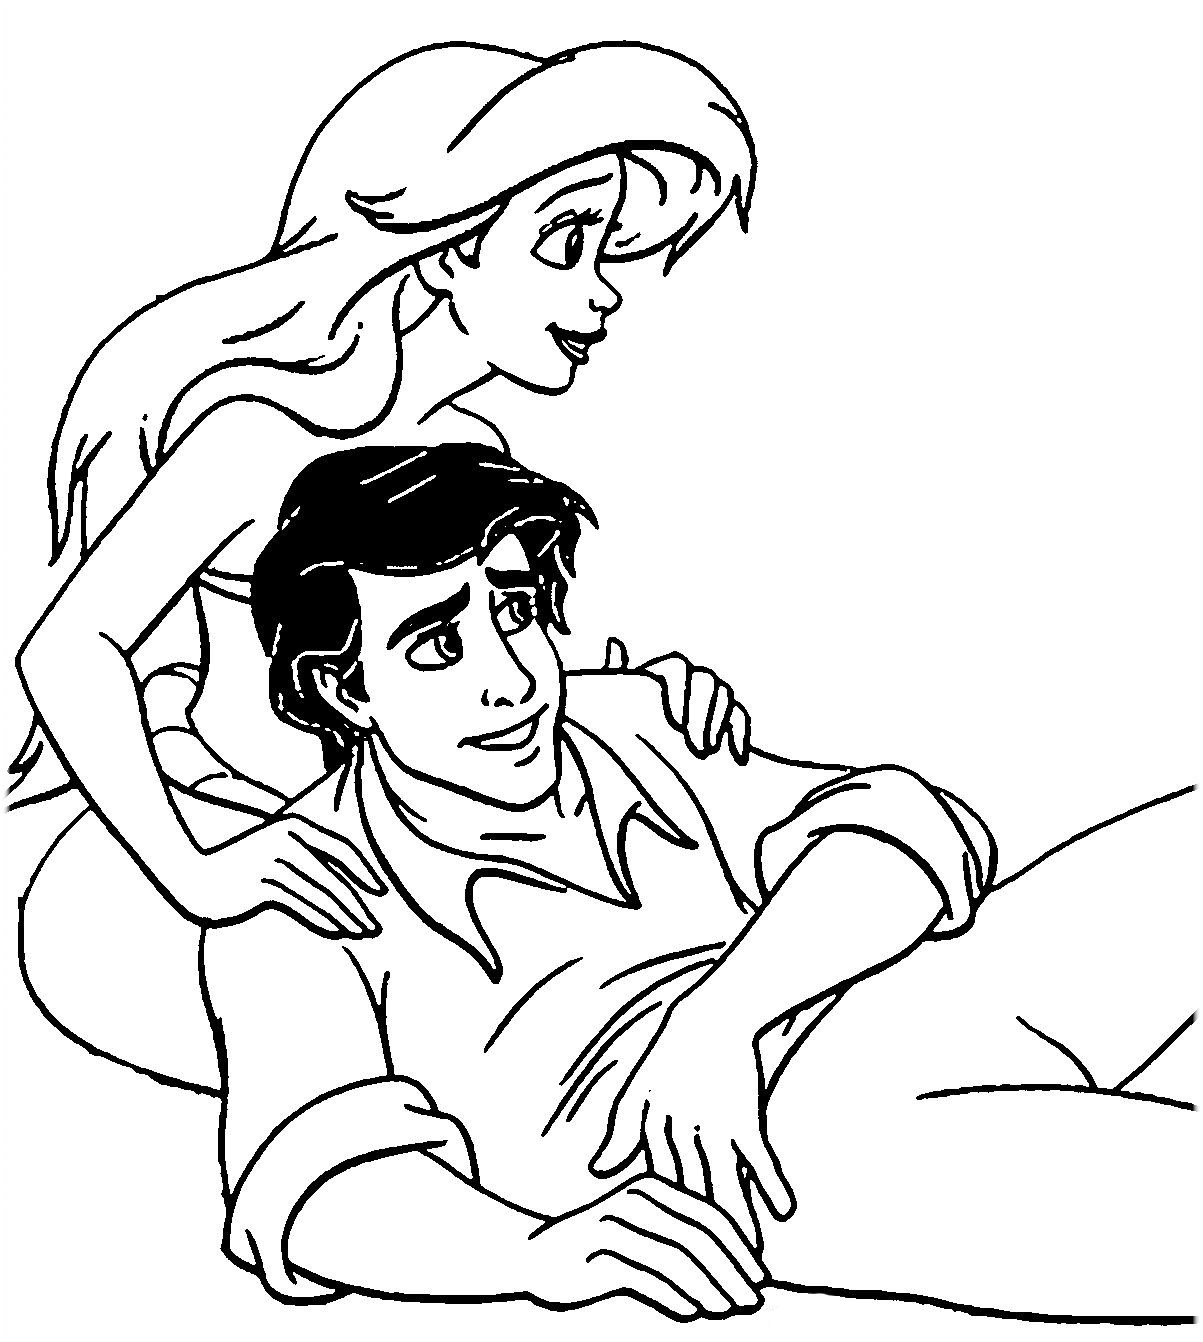 Disney The Little Mermaid 2 Return to the Sea Coloring Page 36 ...